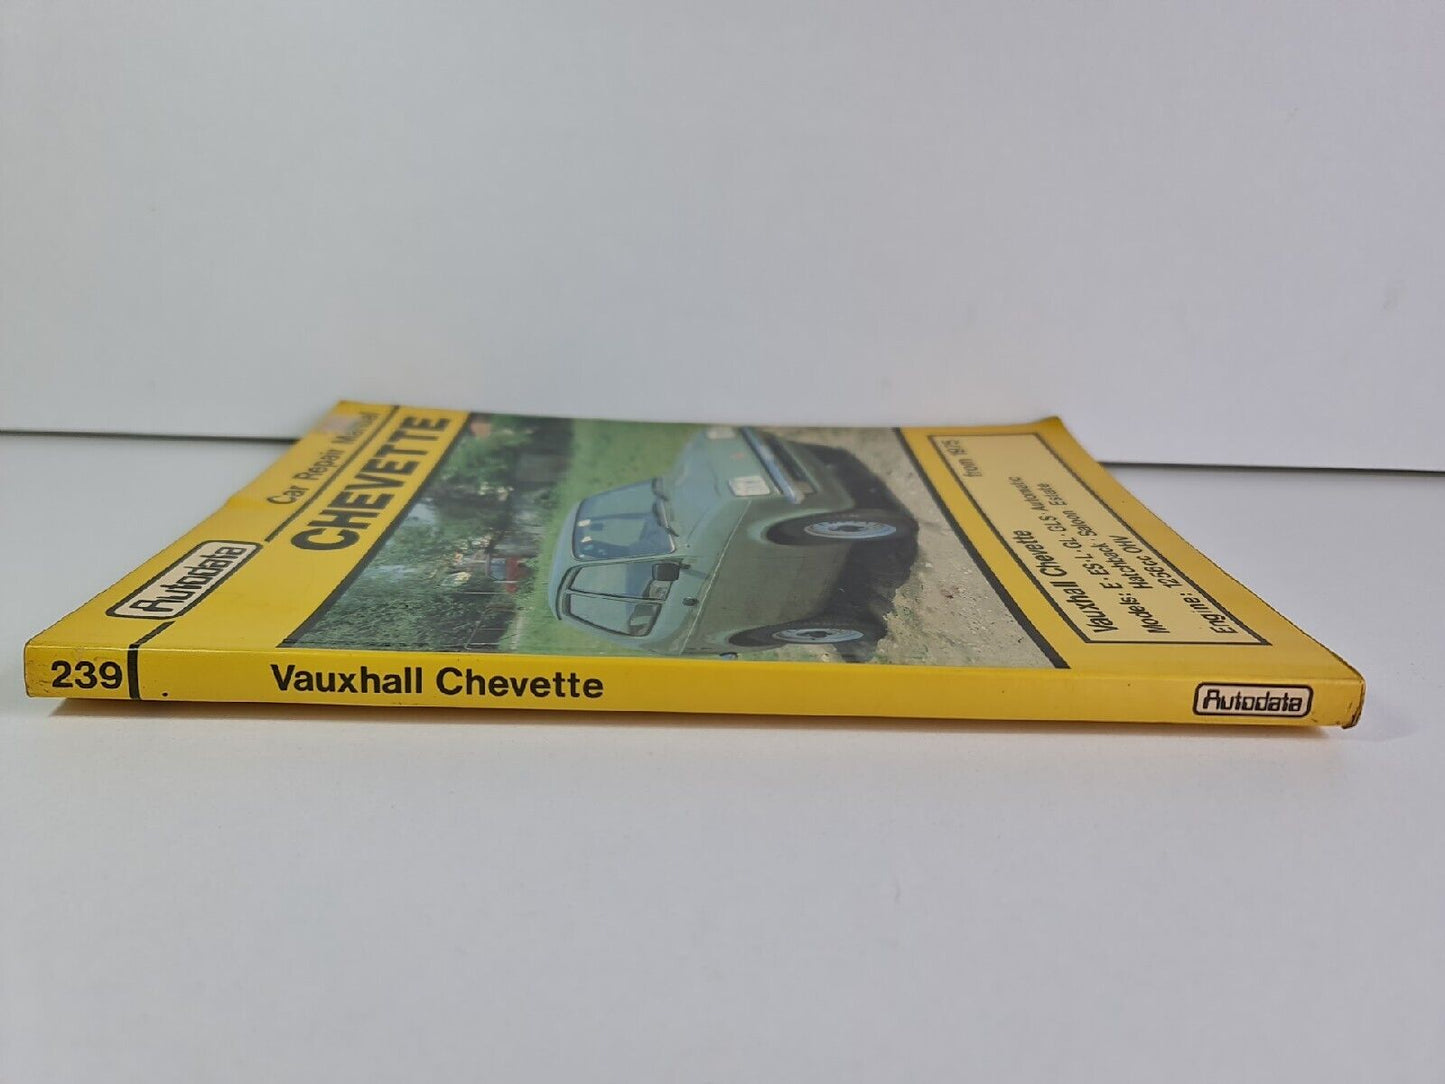 Autodata Vauxhall Chevette from 1975 - Car Repair Manual